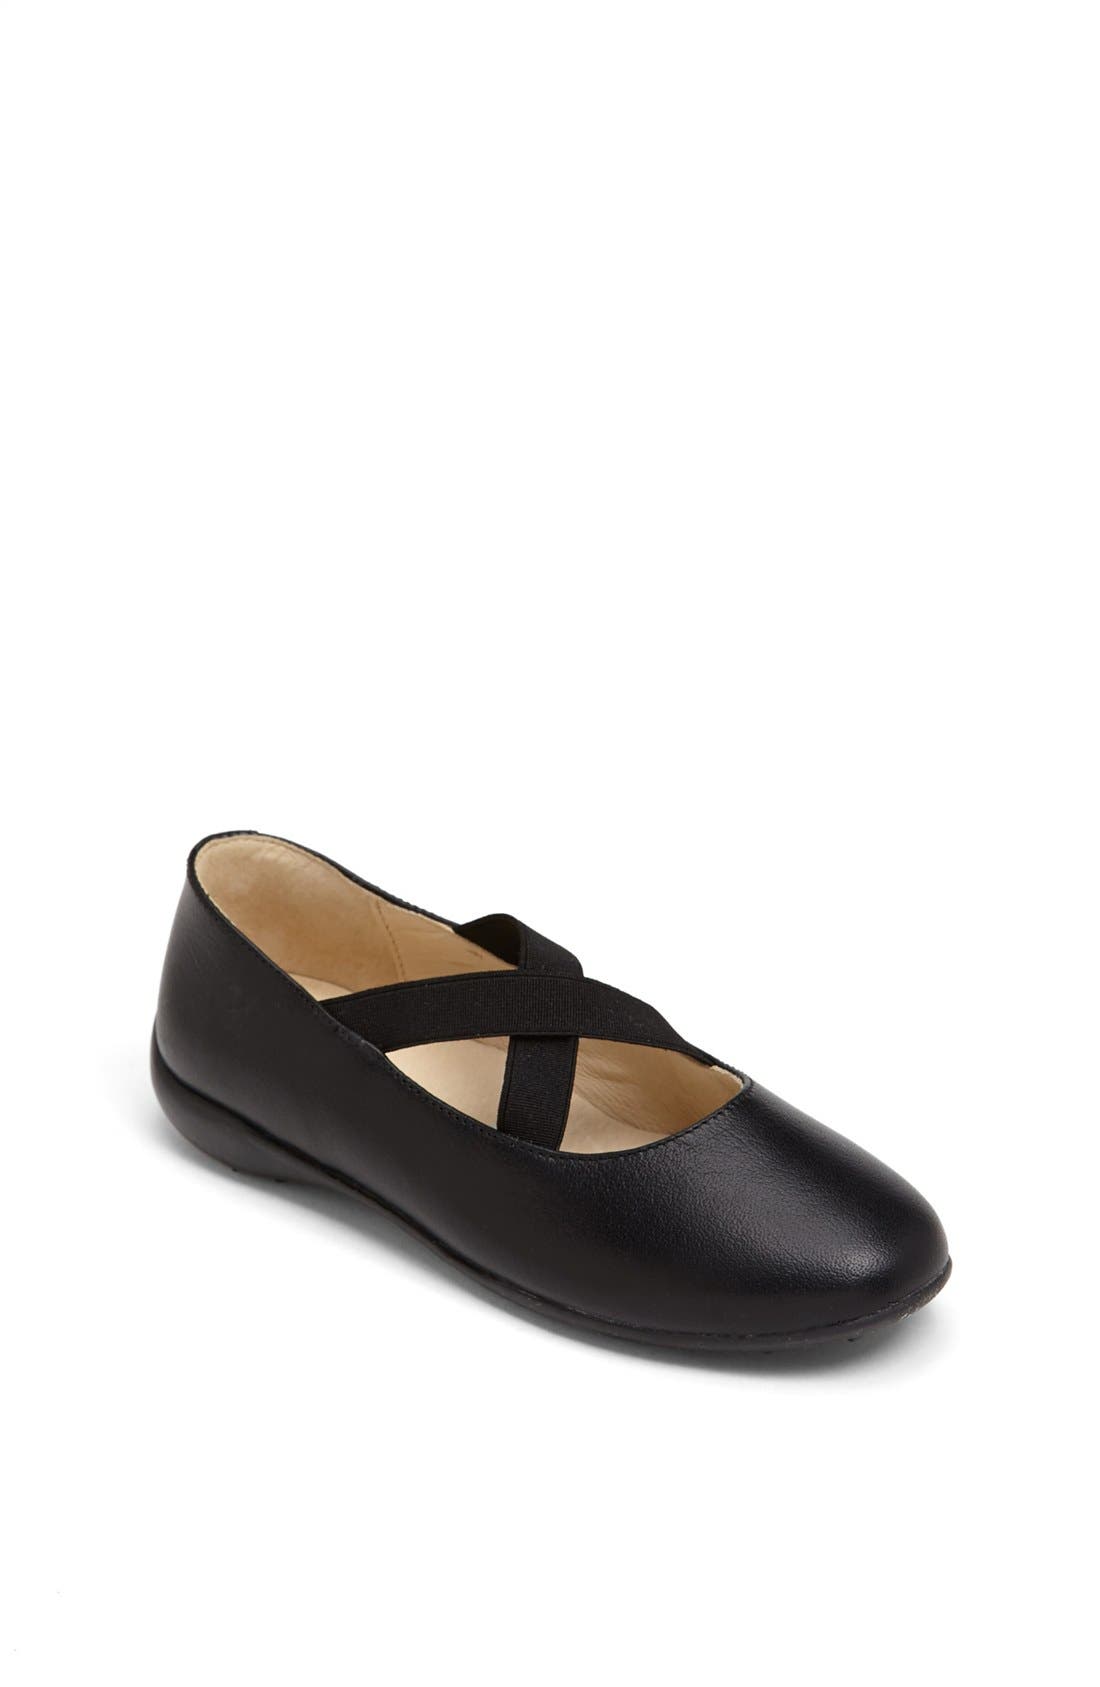 ballet flats with criss cross straps